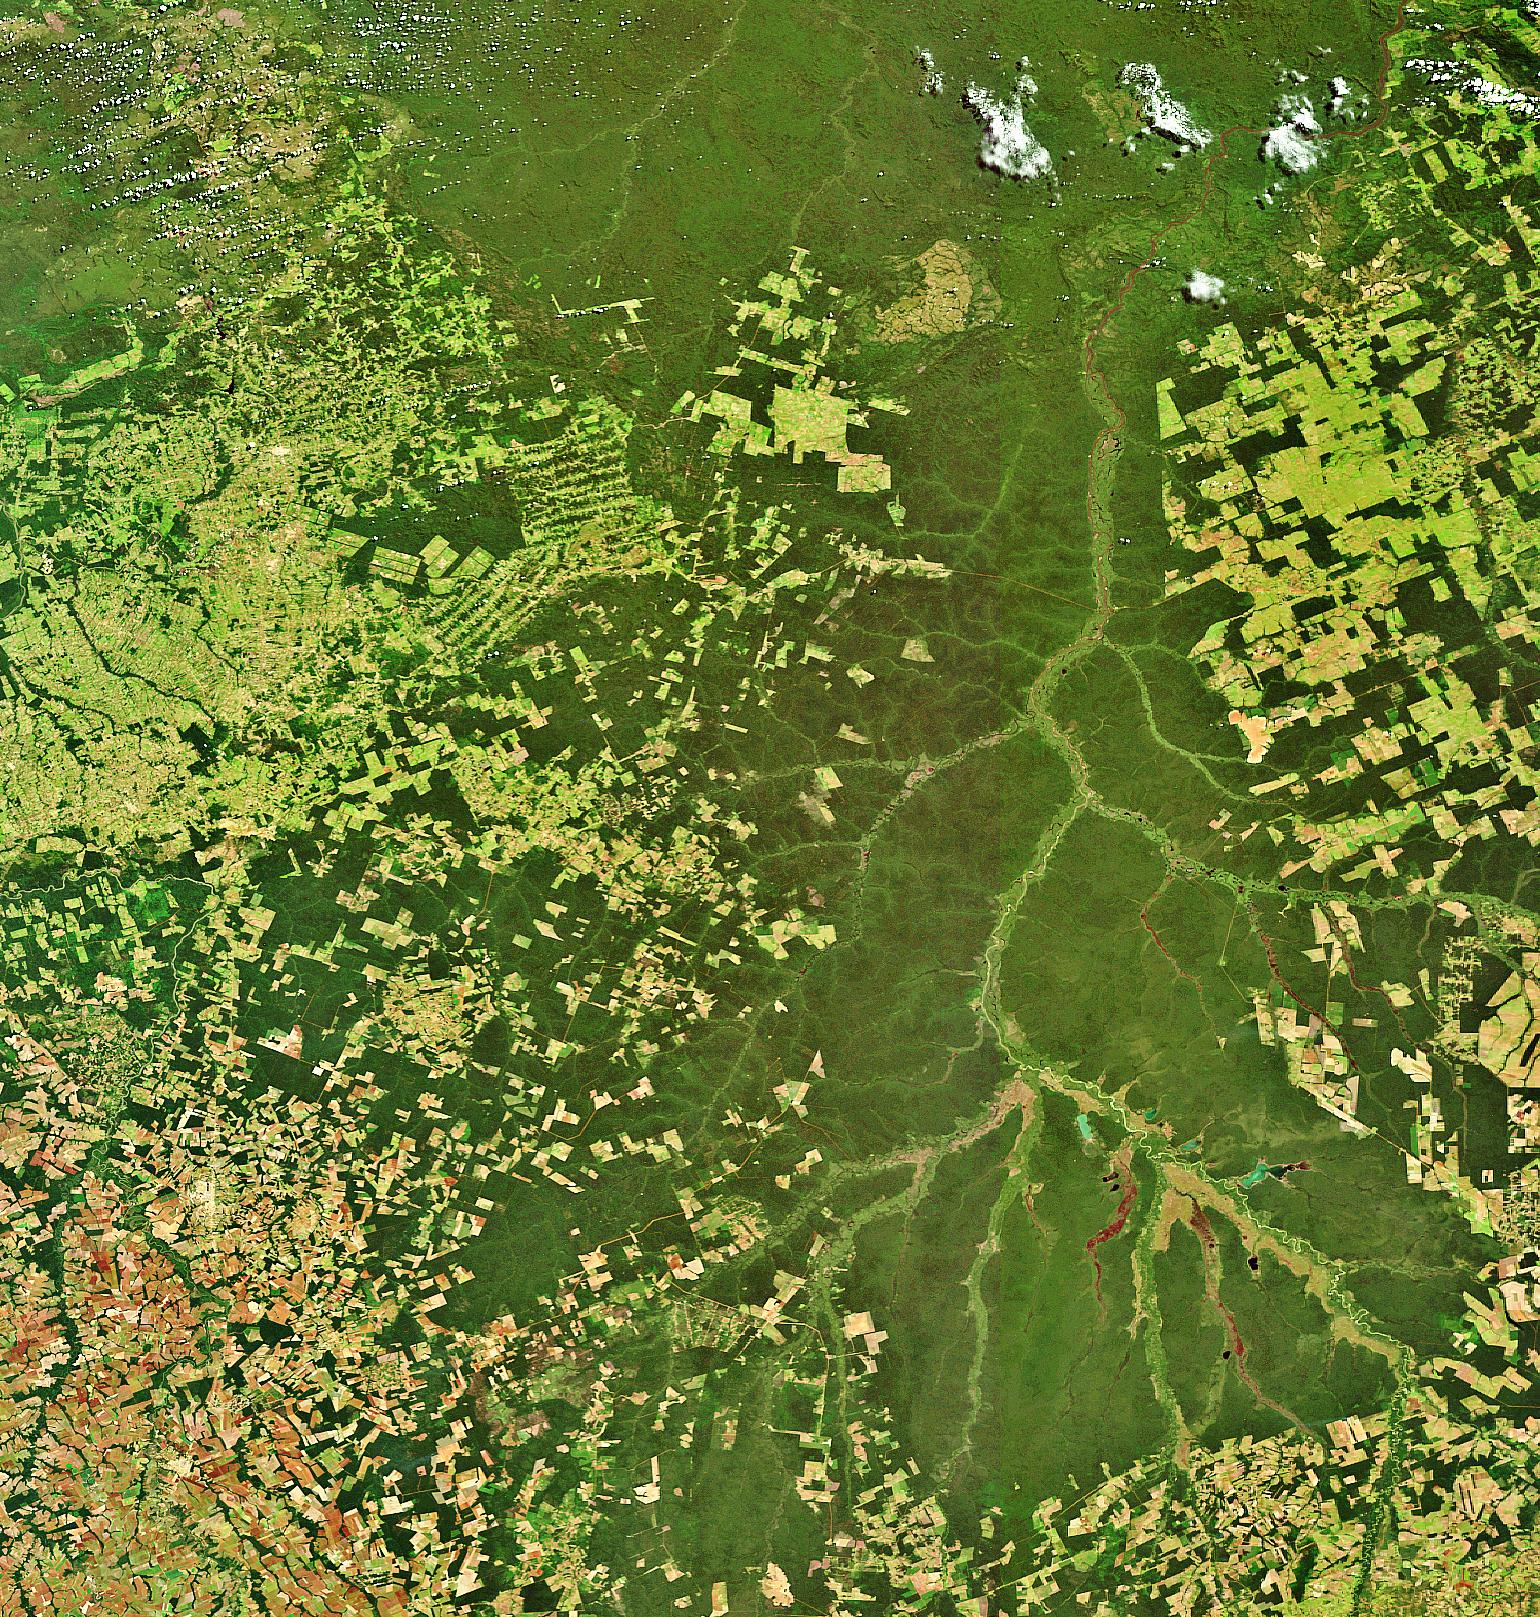 Satellite image of the Xingu River in the Para province in northern Brazil. The PVG project is proposed for the Volta Grande region of the river.